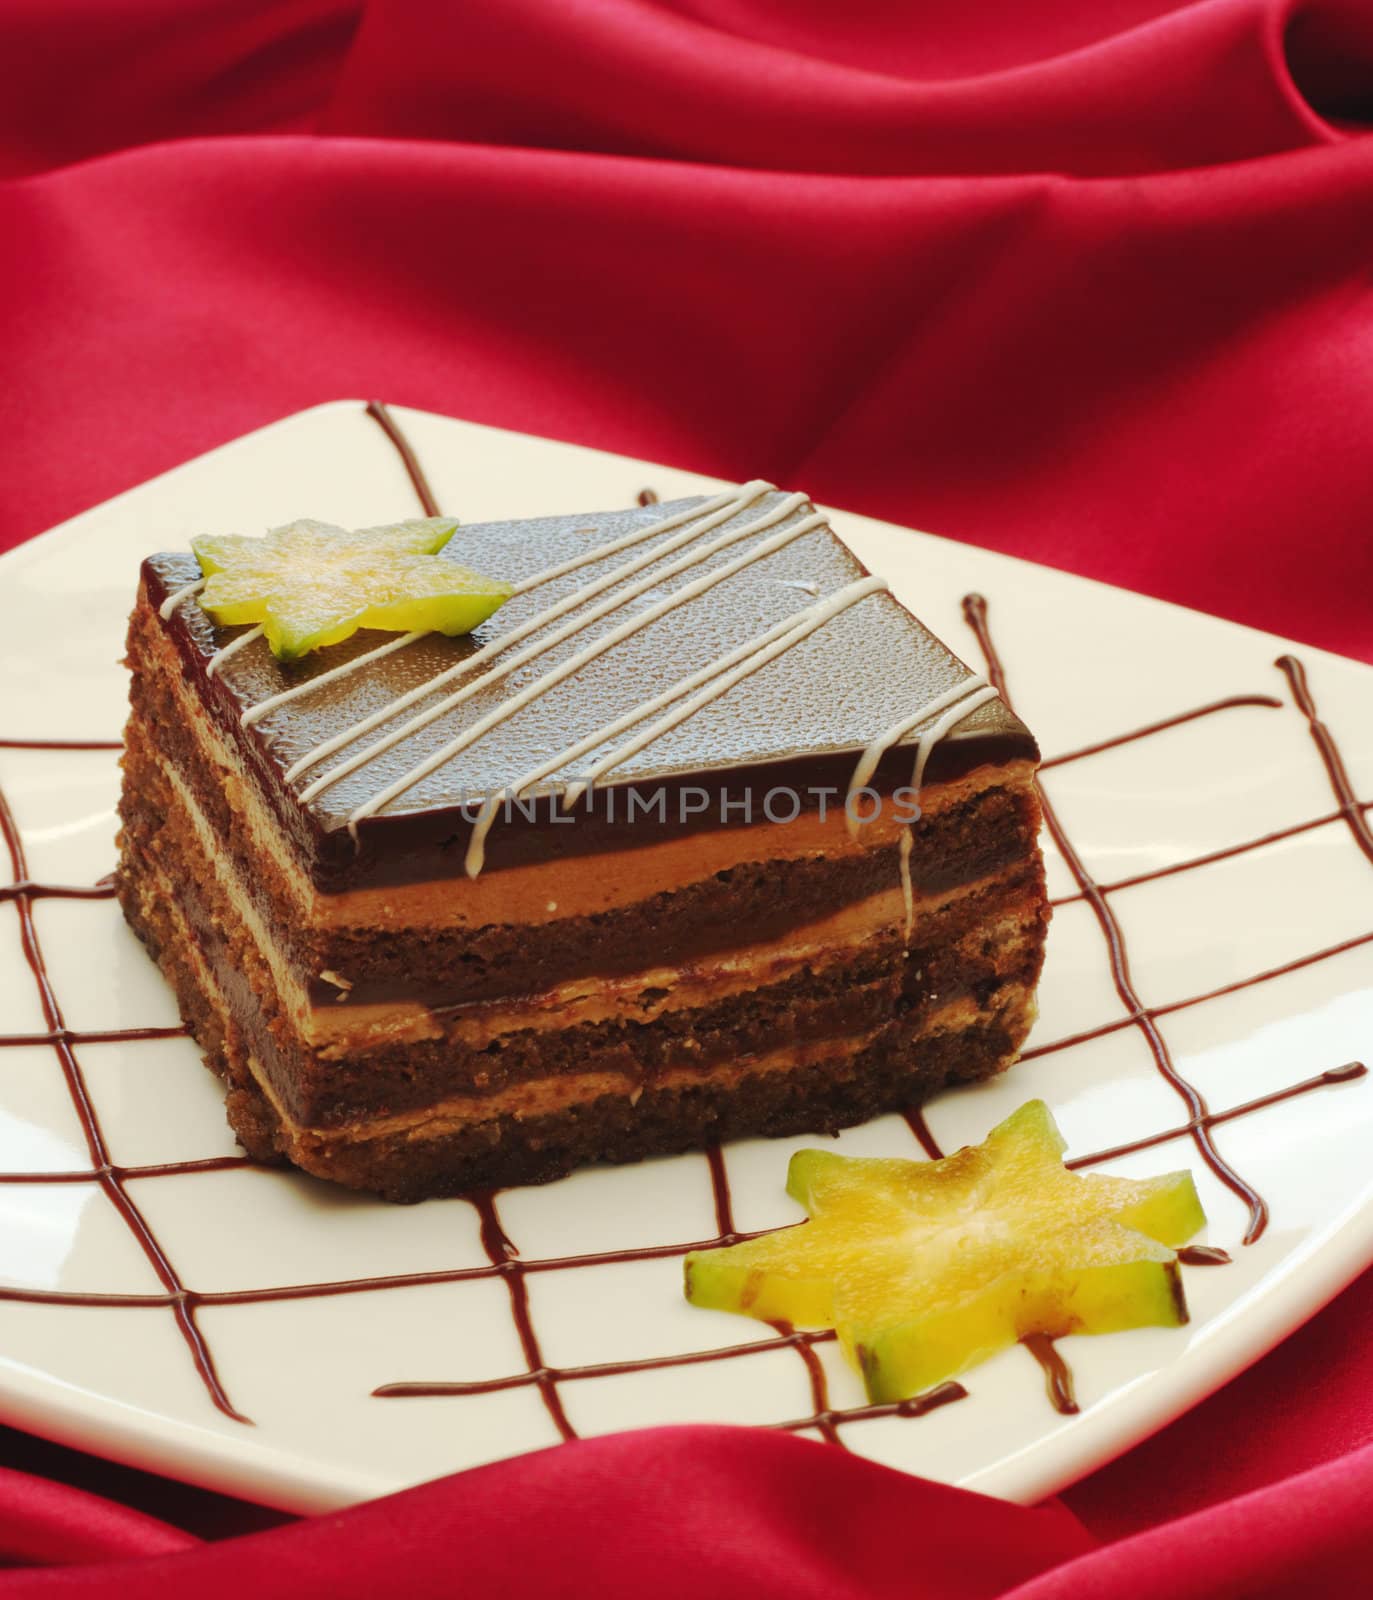 Tiramisu Cake on white plate with chocolate syrup and carambola as decoration on red fabric (Selective Focus)